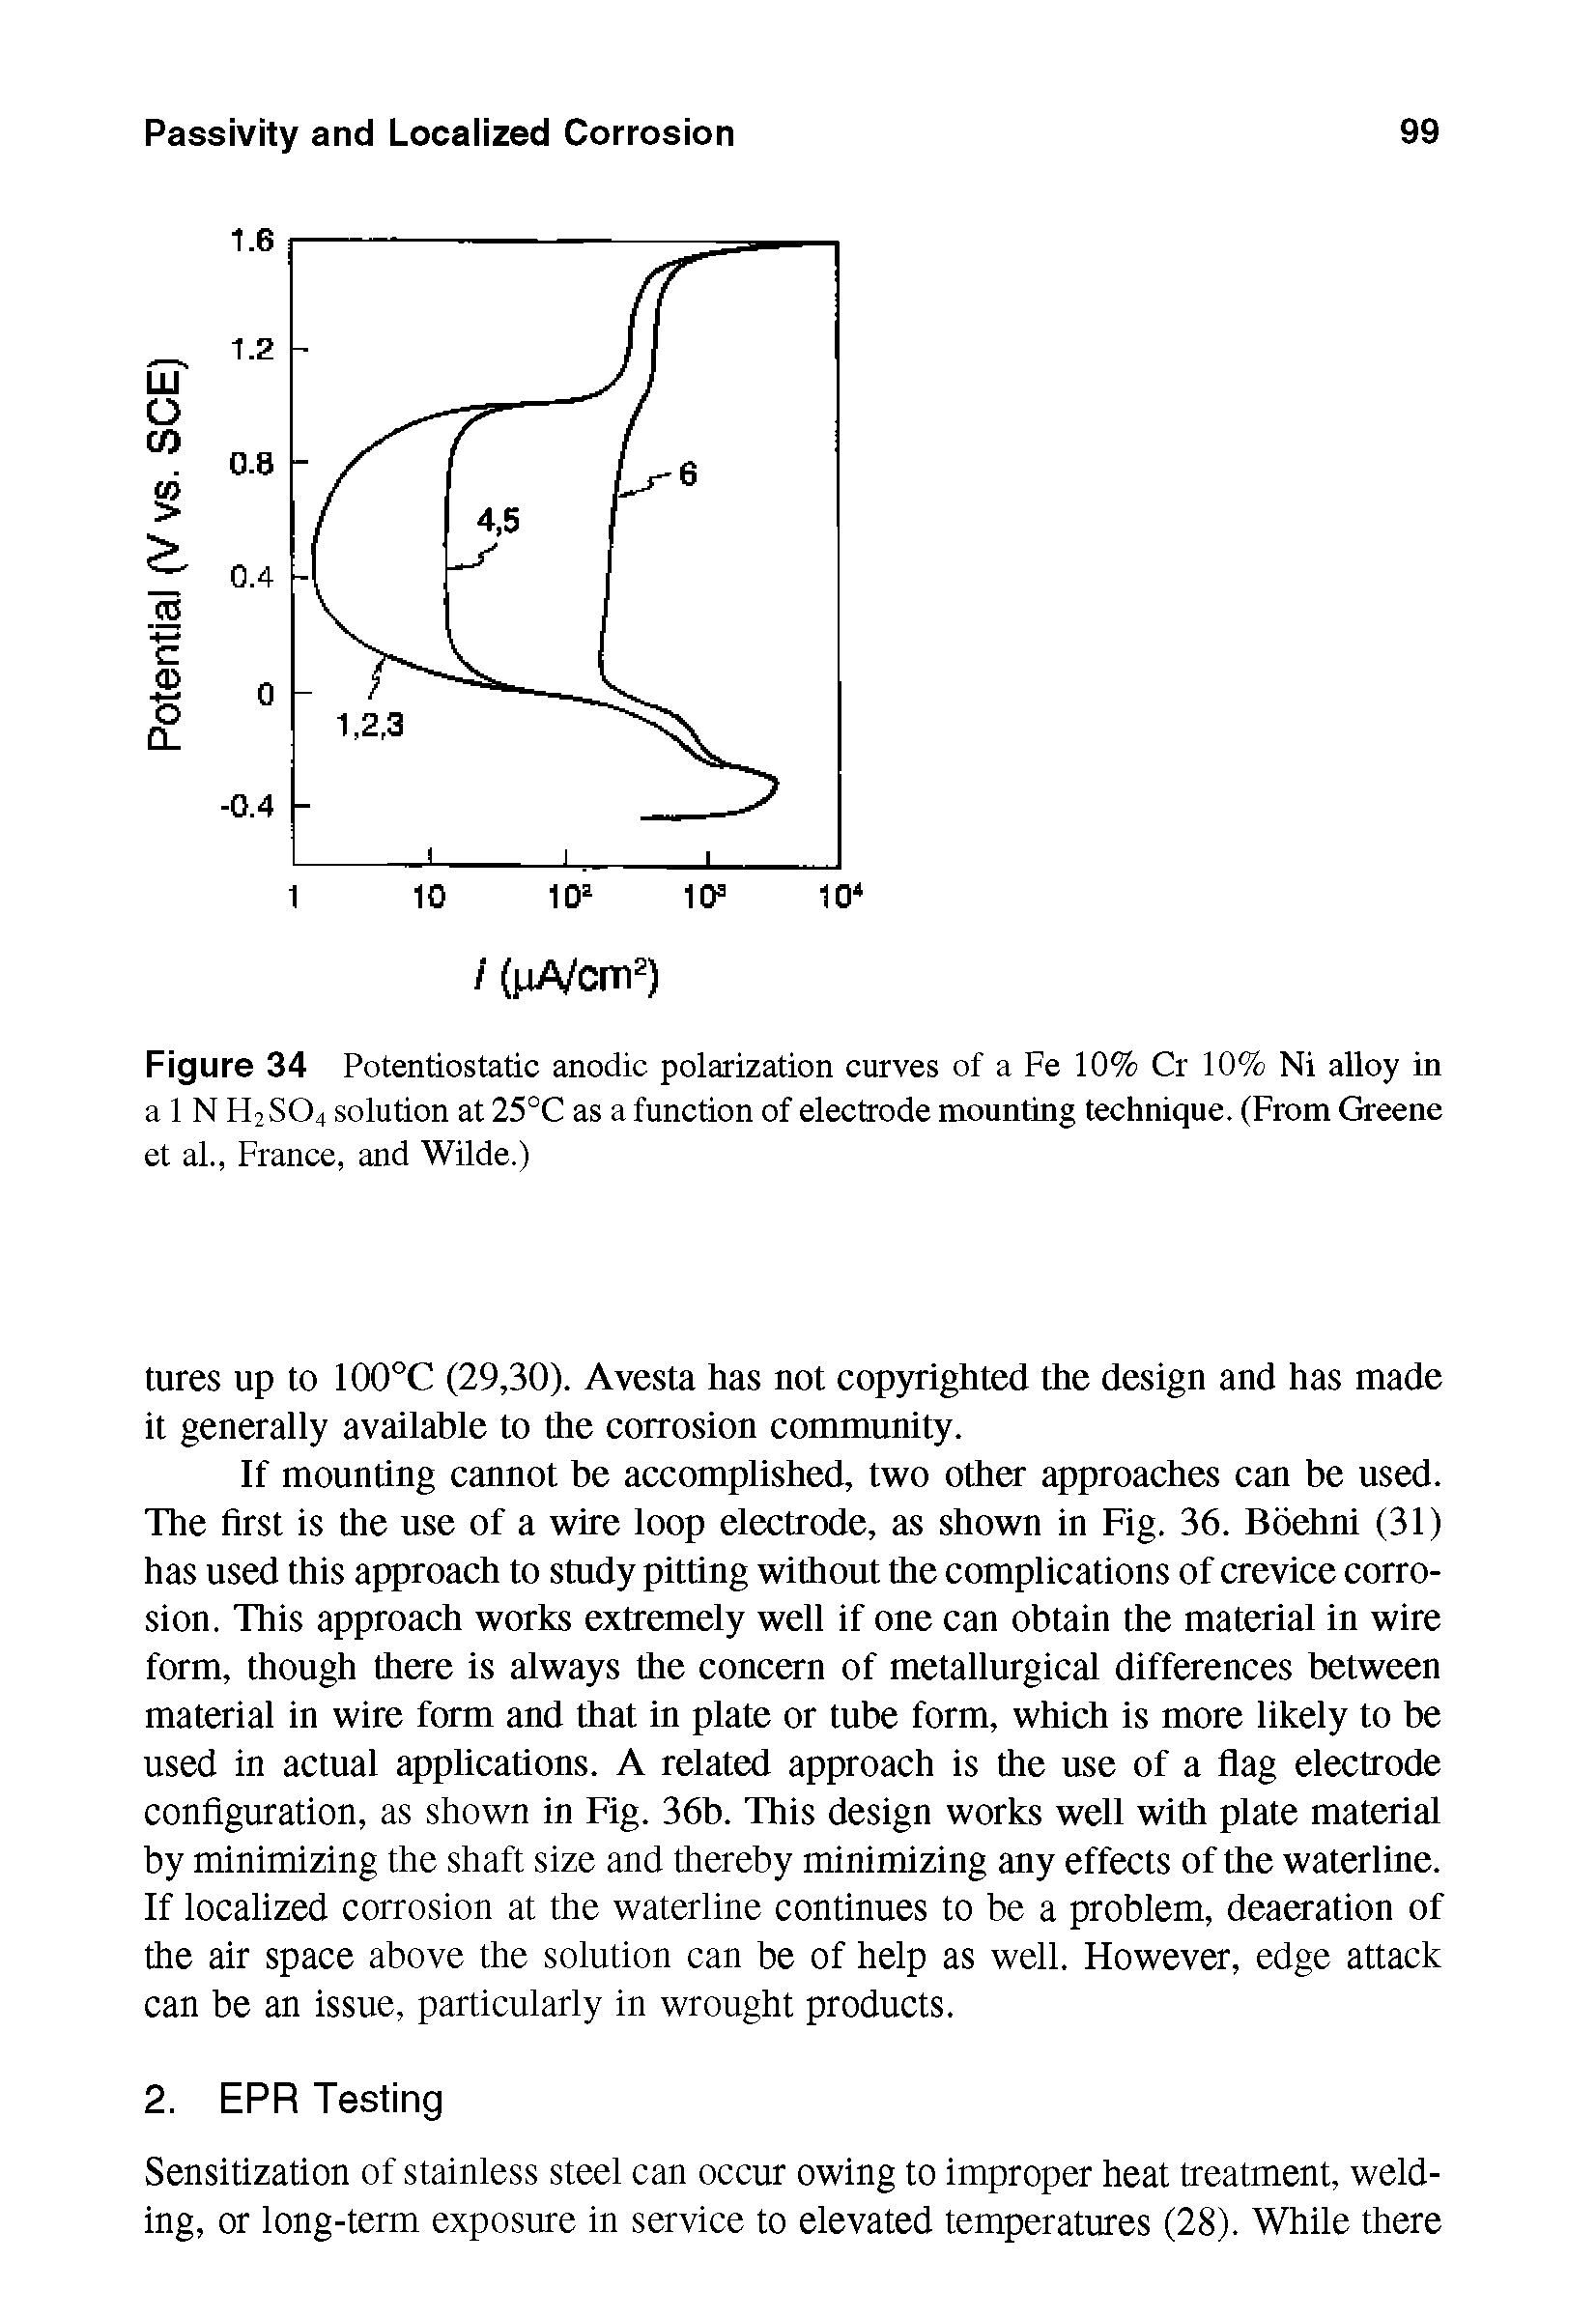 Figure 34 Potentiostatic anodic polarization curves of a Fe 10% Cr 10% Ni alloy in a 1 N H2S04 solution at 25°C as a function of electrode mounting technique. (From Greene et al., France, and Wilde.)...